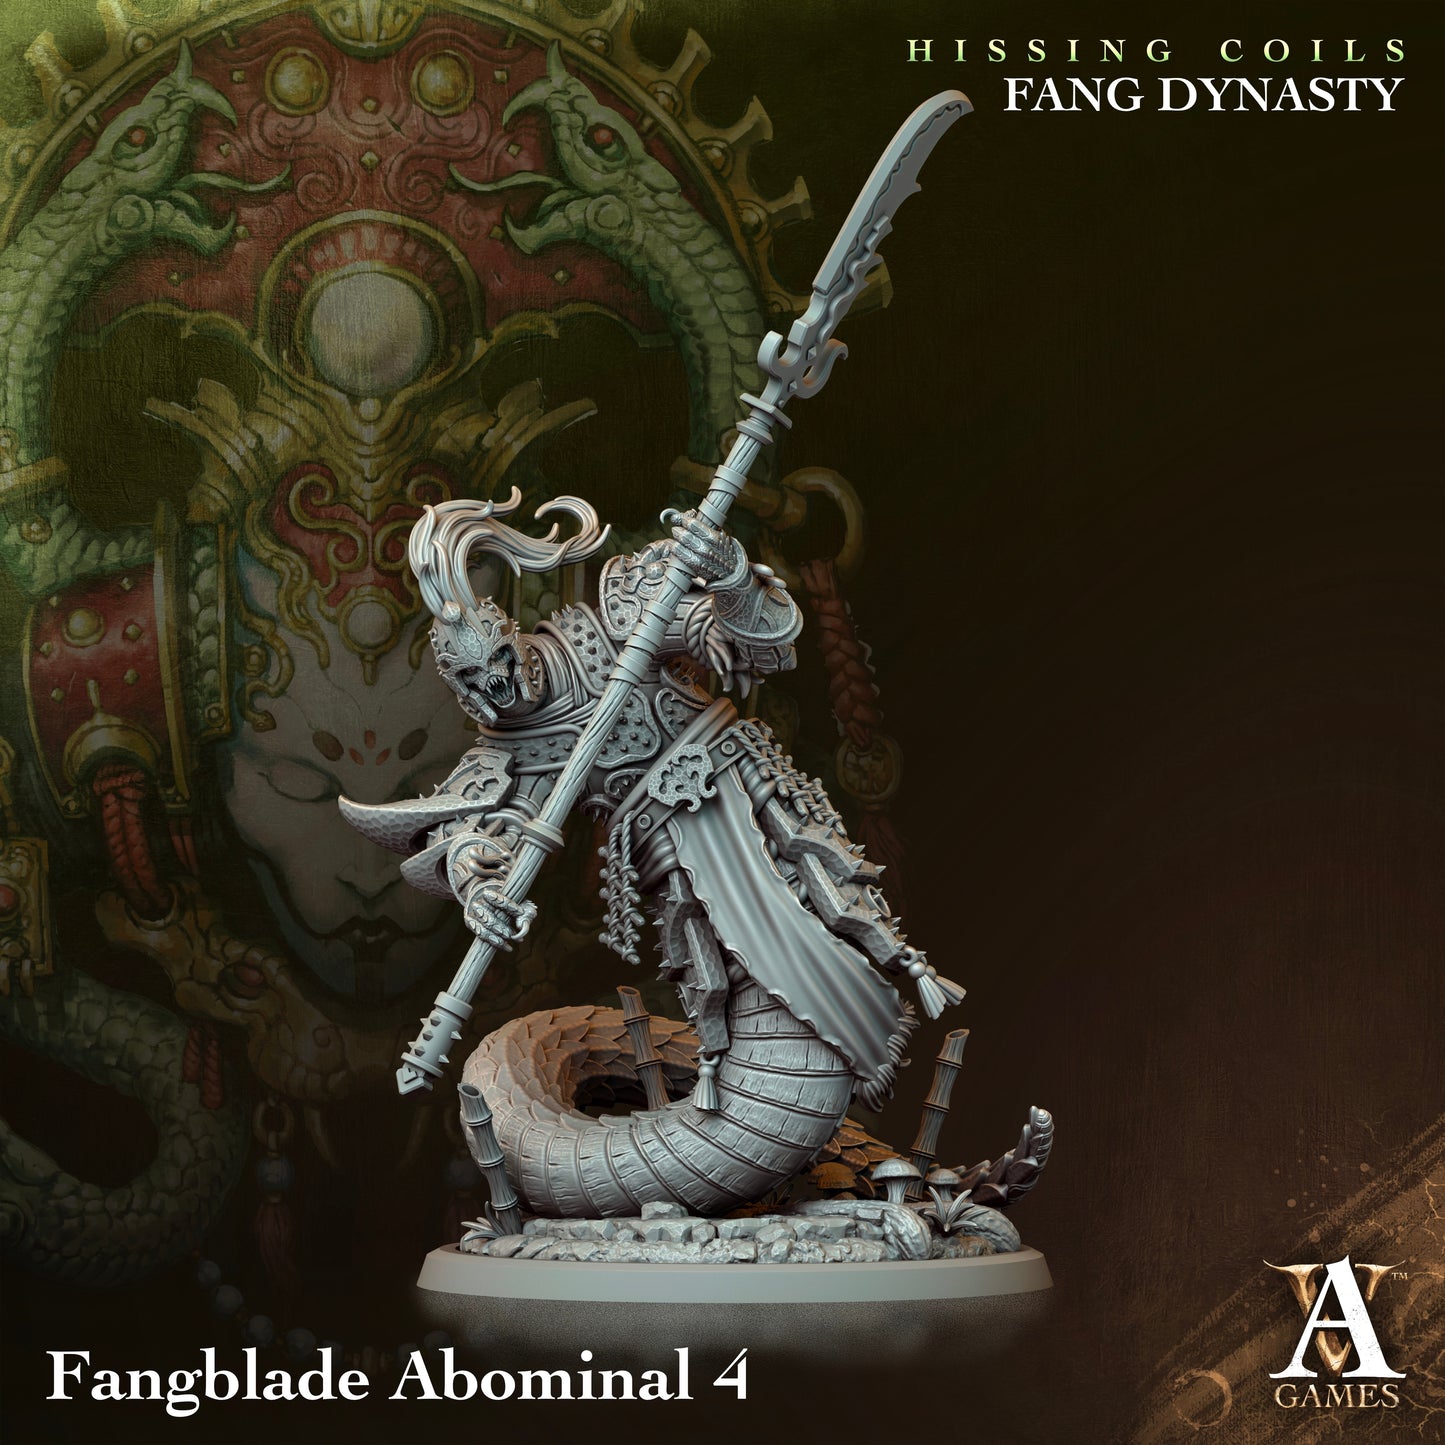 Fangblade Abominal